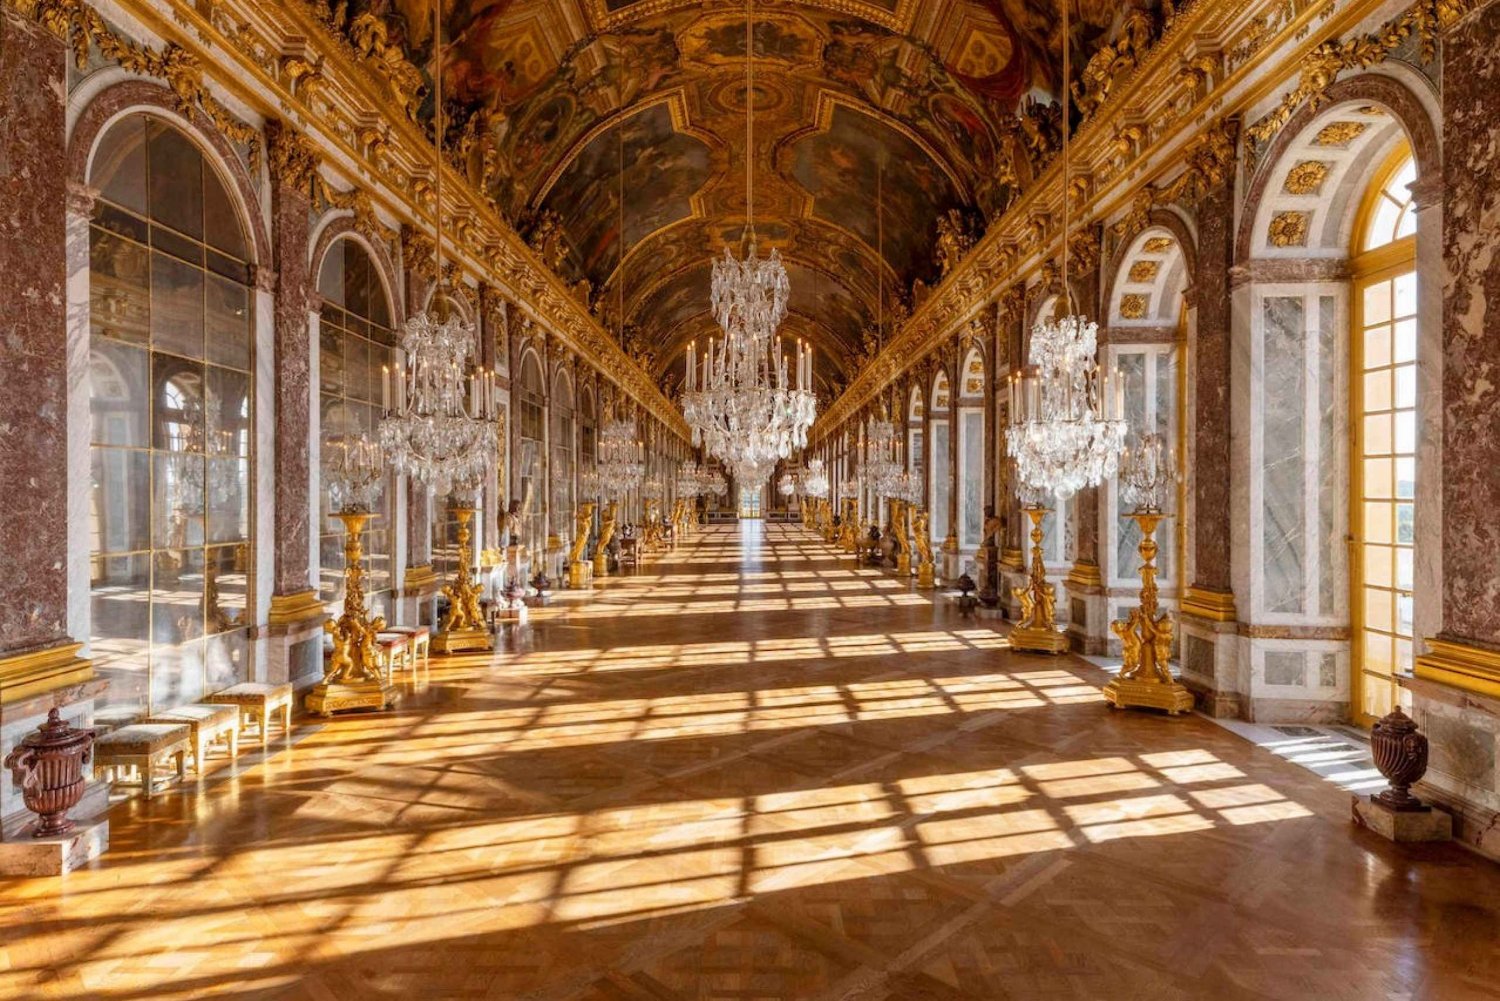 Take-a-Day-Trip-to-the-Palace-of-Versailles